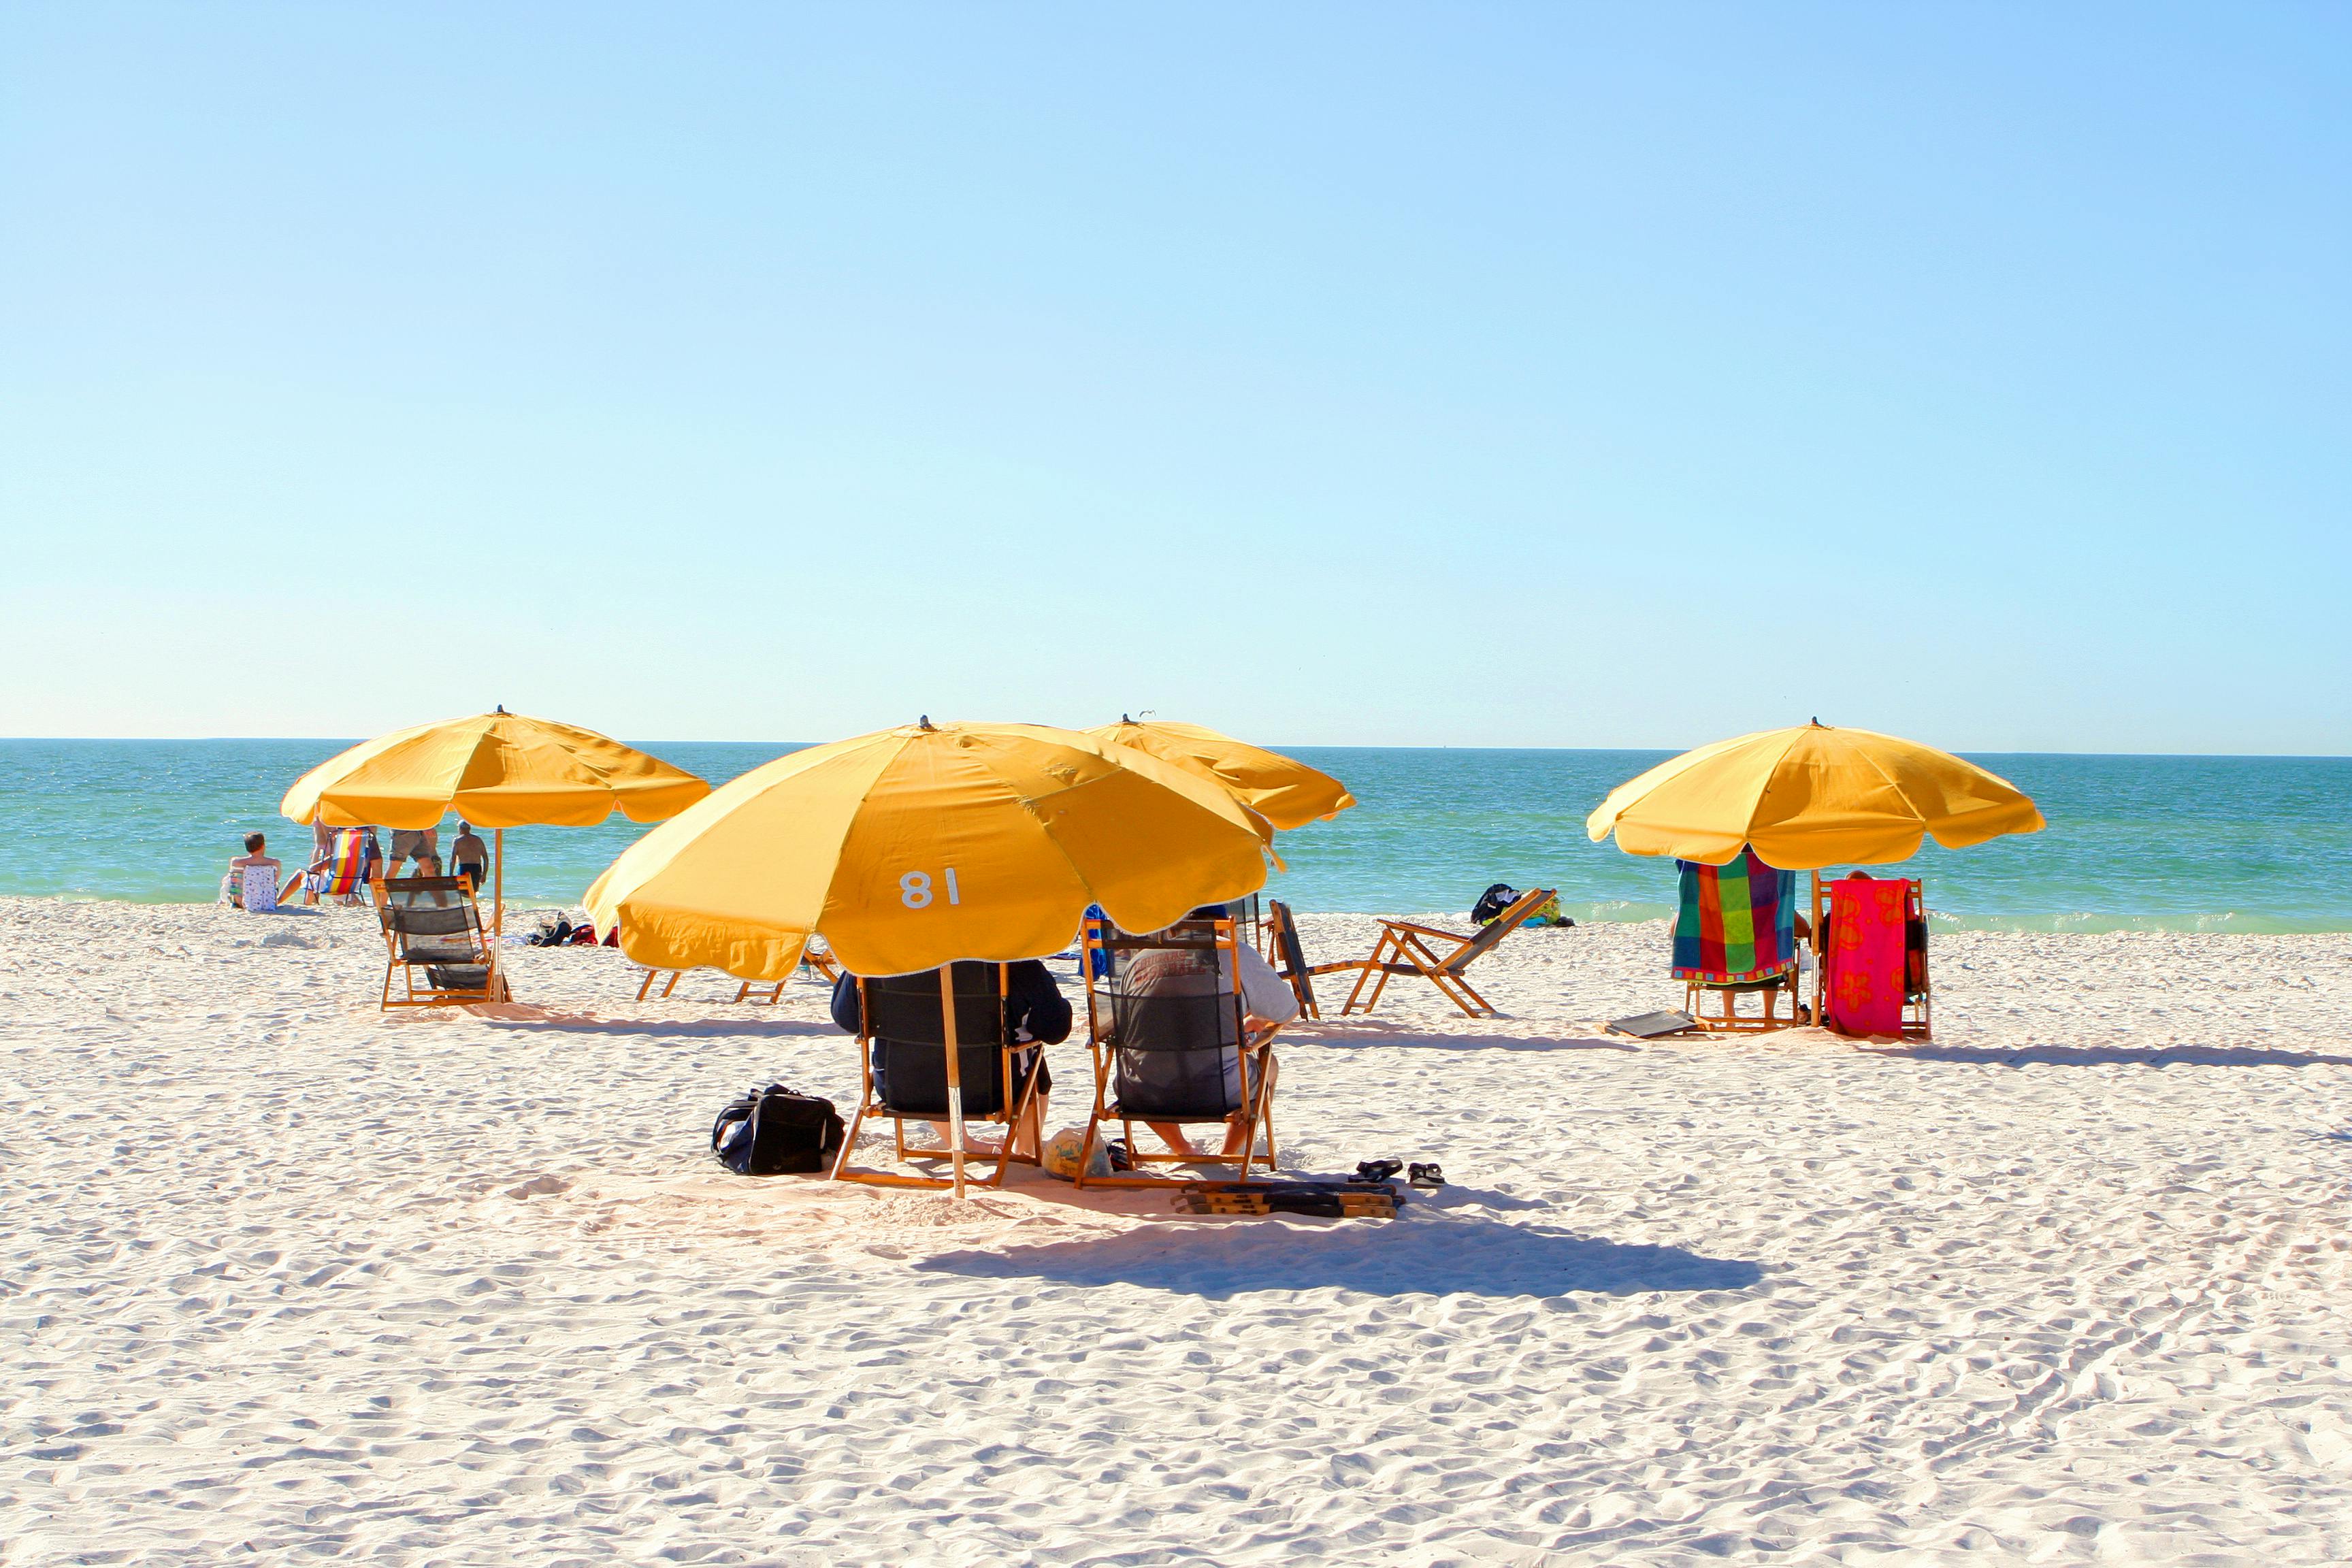 Clearwater Beach: roundtrip transportation from Orlando with lunch